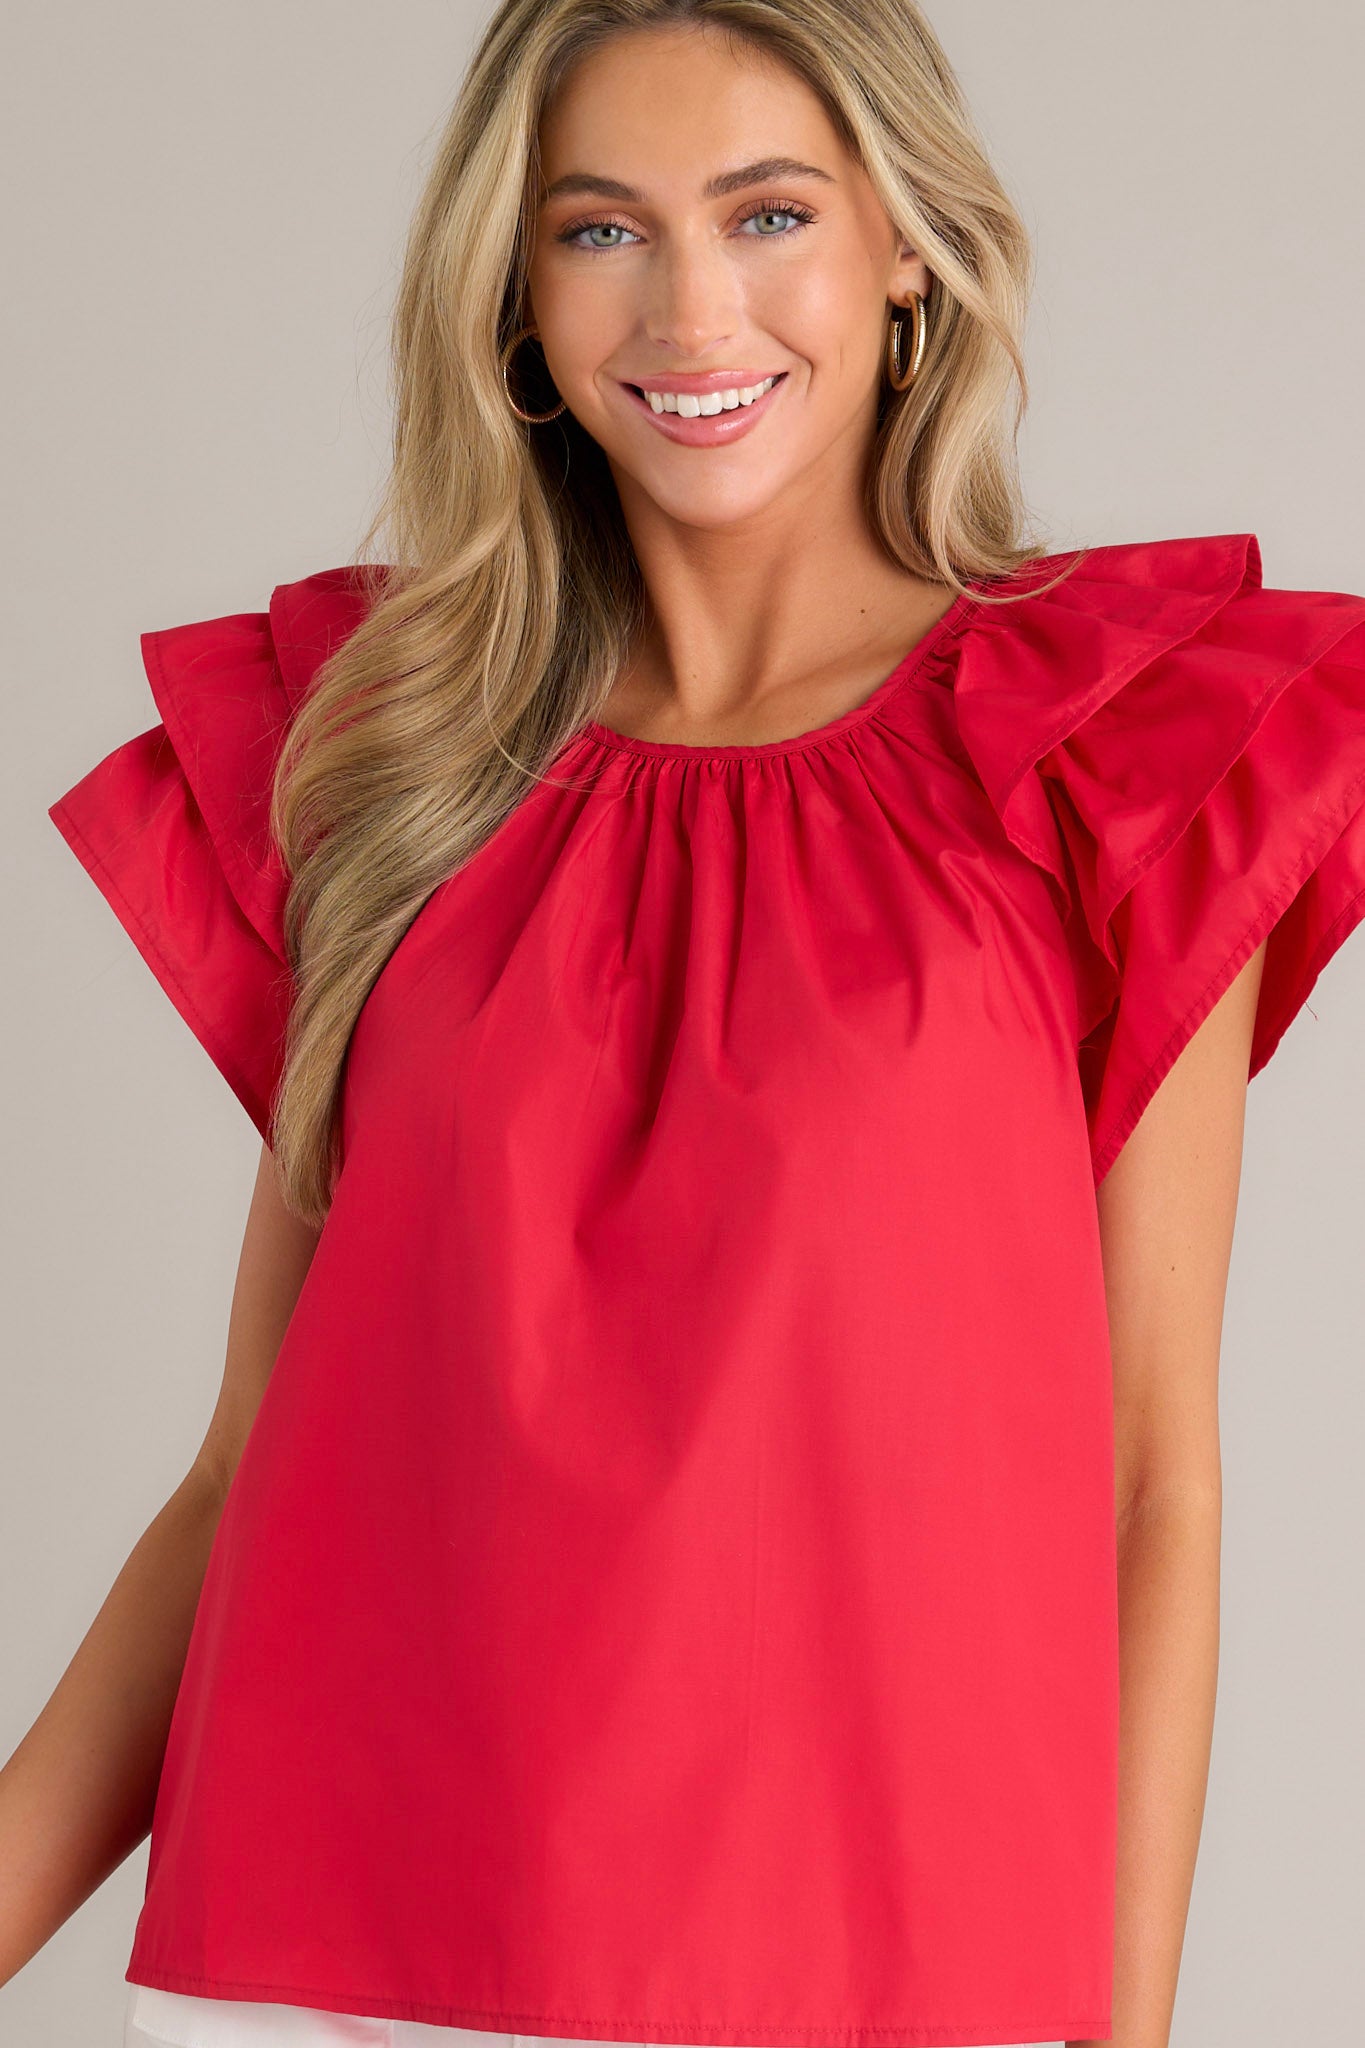 Front view of a red top featuring a rounded neckline, gathering at the neckline, a keyhole with a button closure, and ruffled short sleeves.